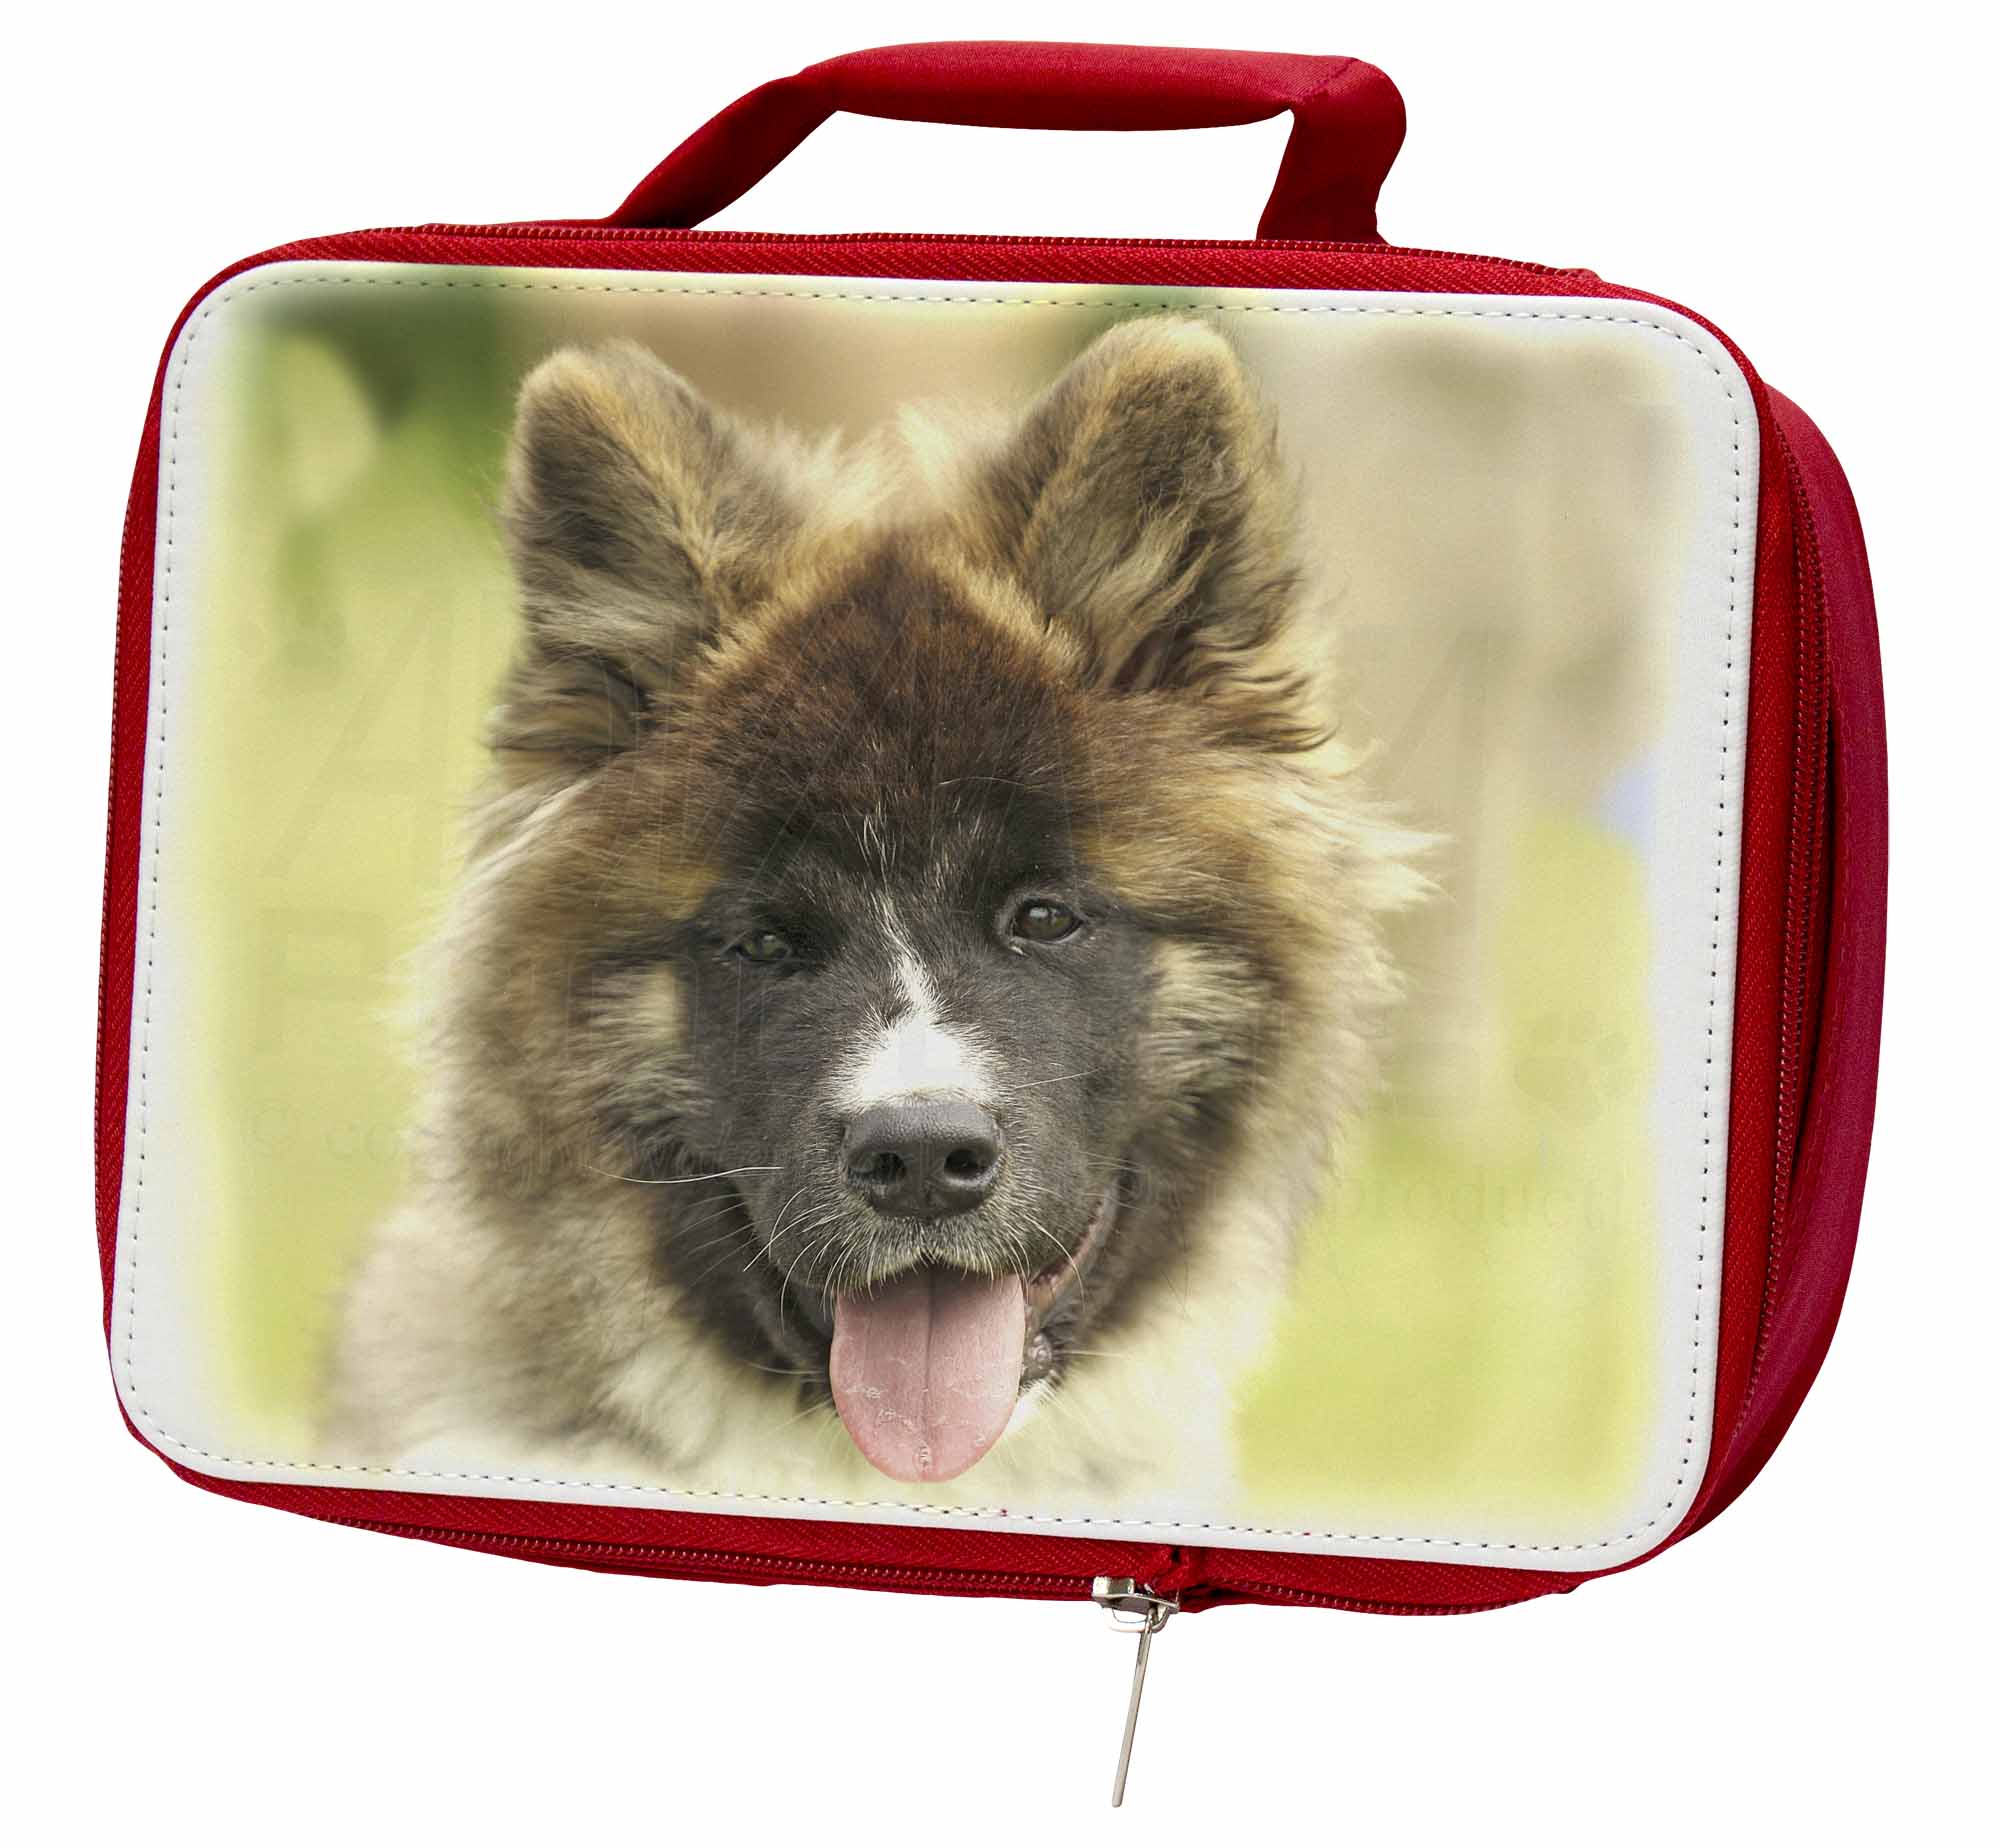 AD-BER1LBR Bernese Mountain Dog Insulated Red School Lunch Box/Picnic Bag 